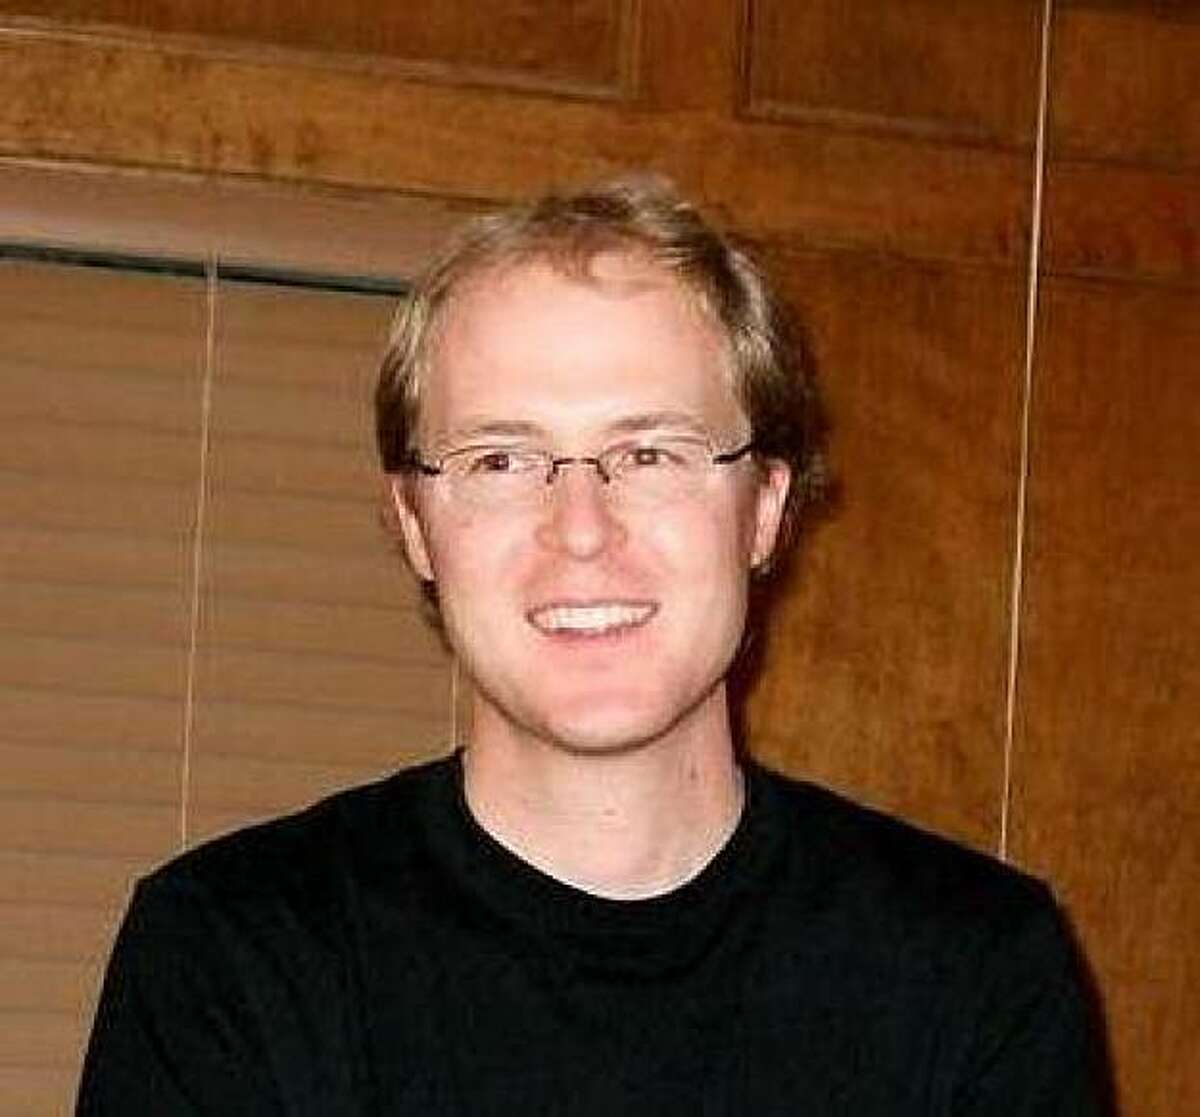 This undated photo provided by Tesla Motors on Thursday, Feb. 18, 2010 shows Andrew Ingram, 31, an electrical engineer and a two-and-a-half-year employee of the company. Ingram and two other colleagues were killed on Wednesday, Feb. 17, 2010, after the twin-engine Cessna 310 they were on crashed in East Palo Alto, Calif. (AP Photo/Tesla Motors) Ran on: 02-19-2010 Andrew Ingram